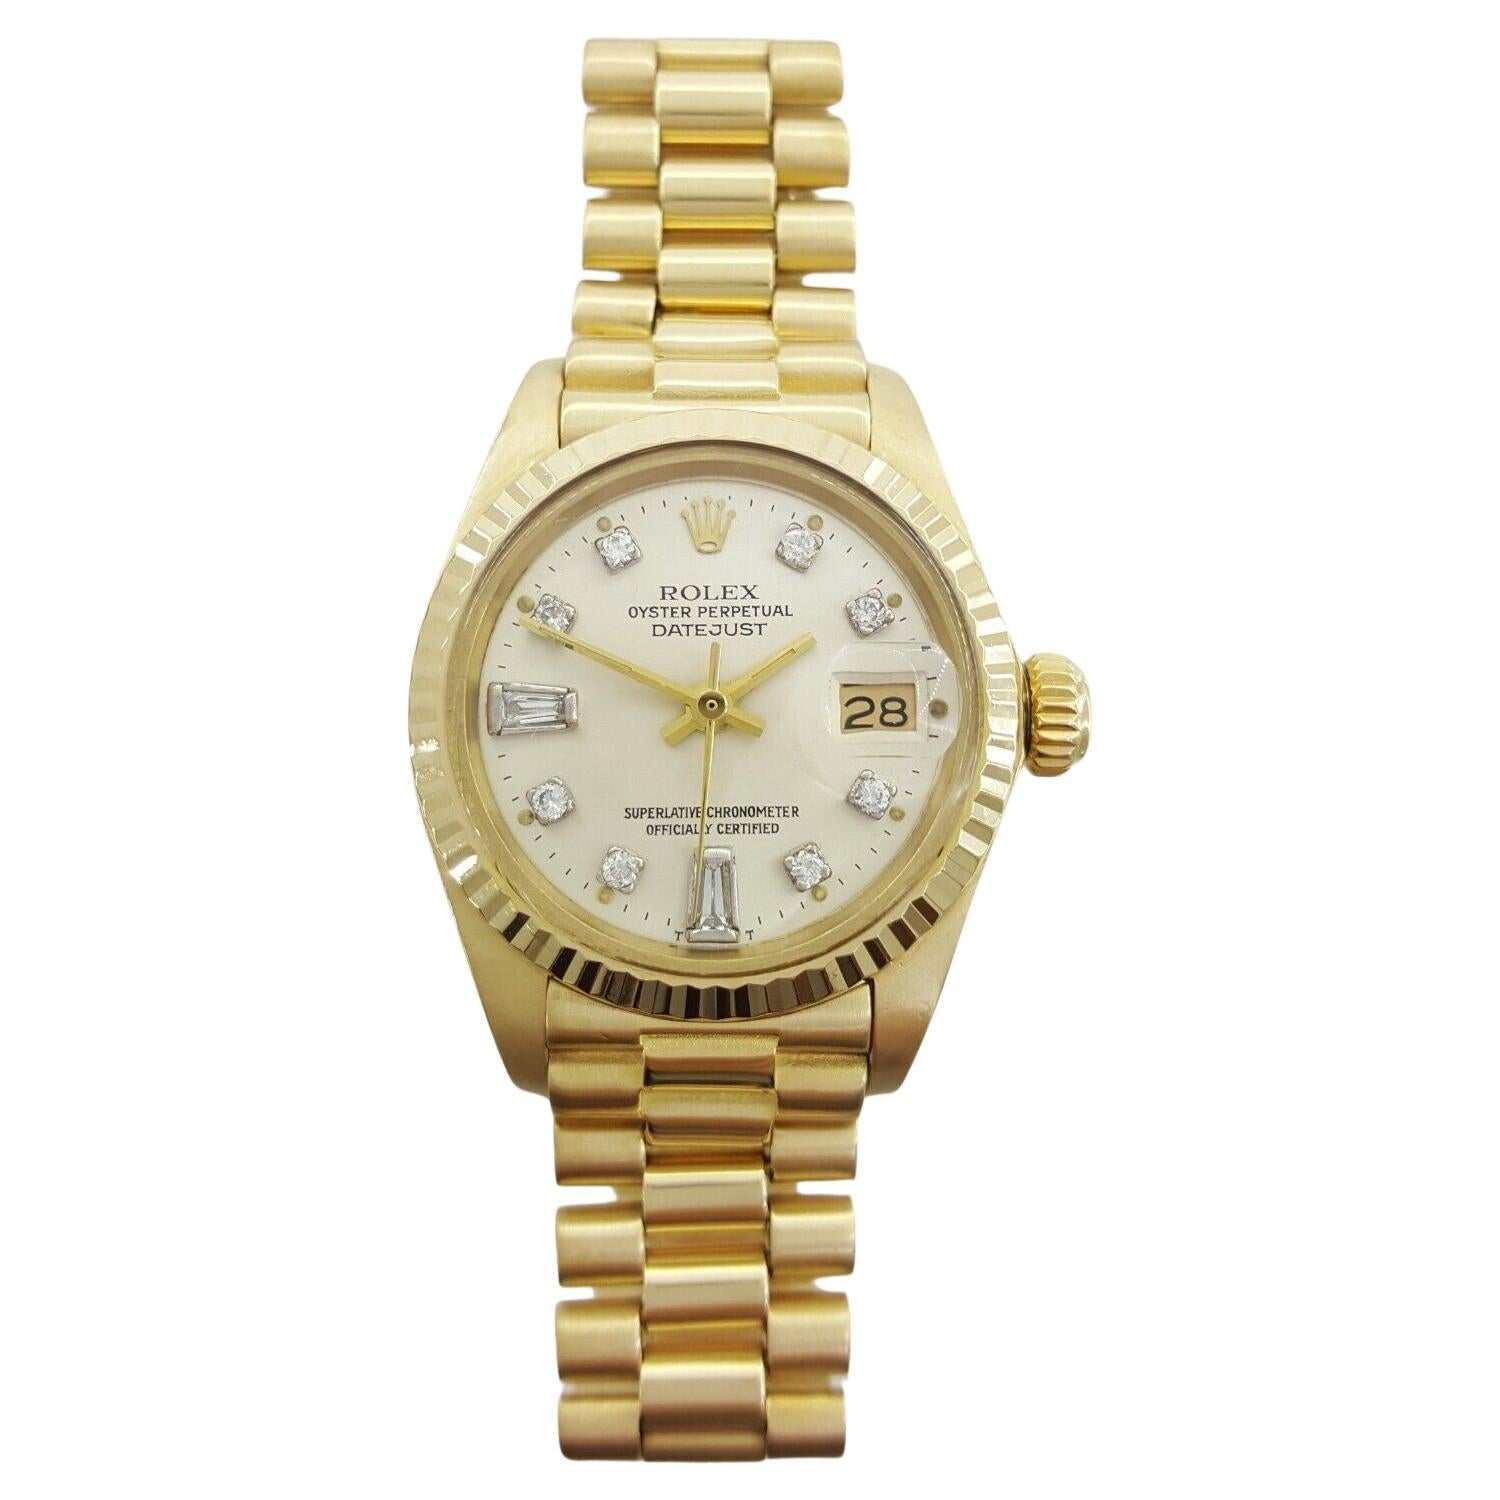 Rolex Lady Date-Just Watch 18K Full Yellow Gold 